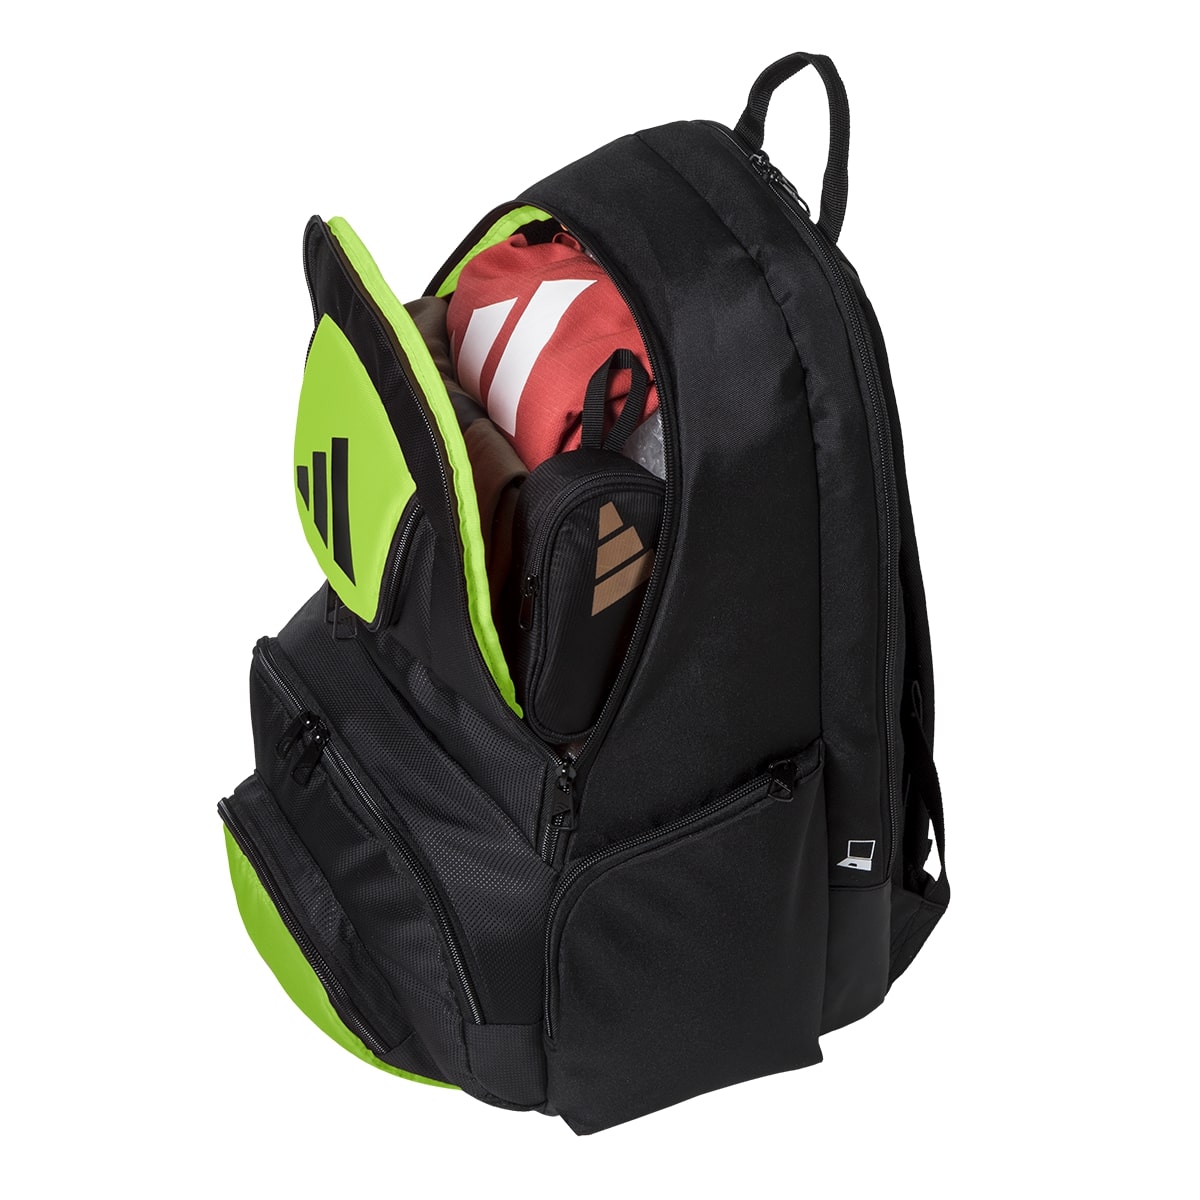 Adidas Pro Tour 3.2 Backpack - Lime-Main pouch